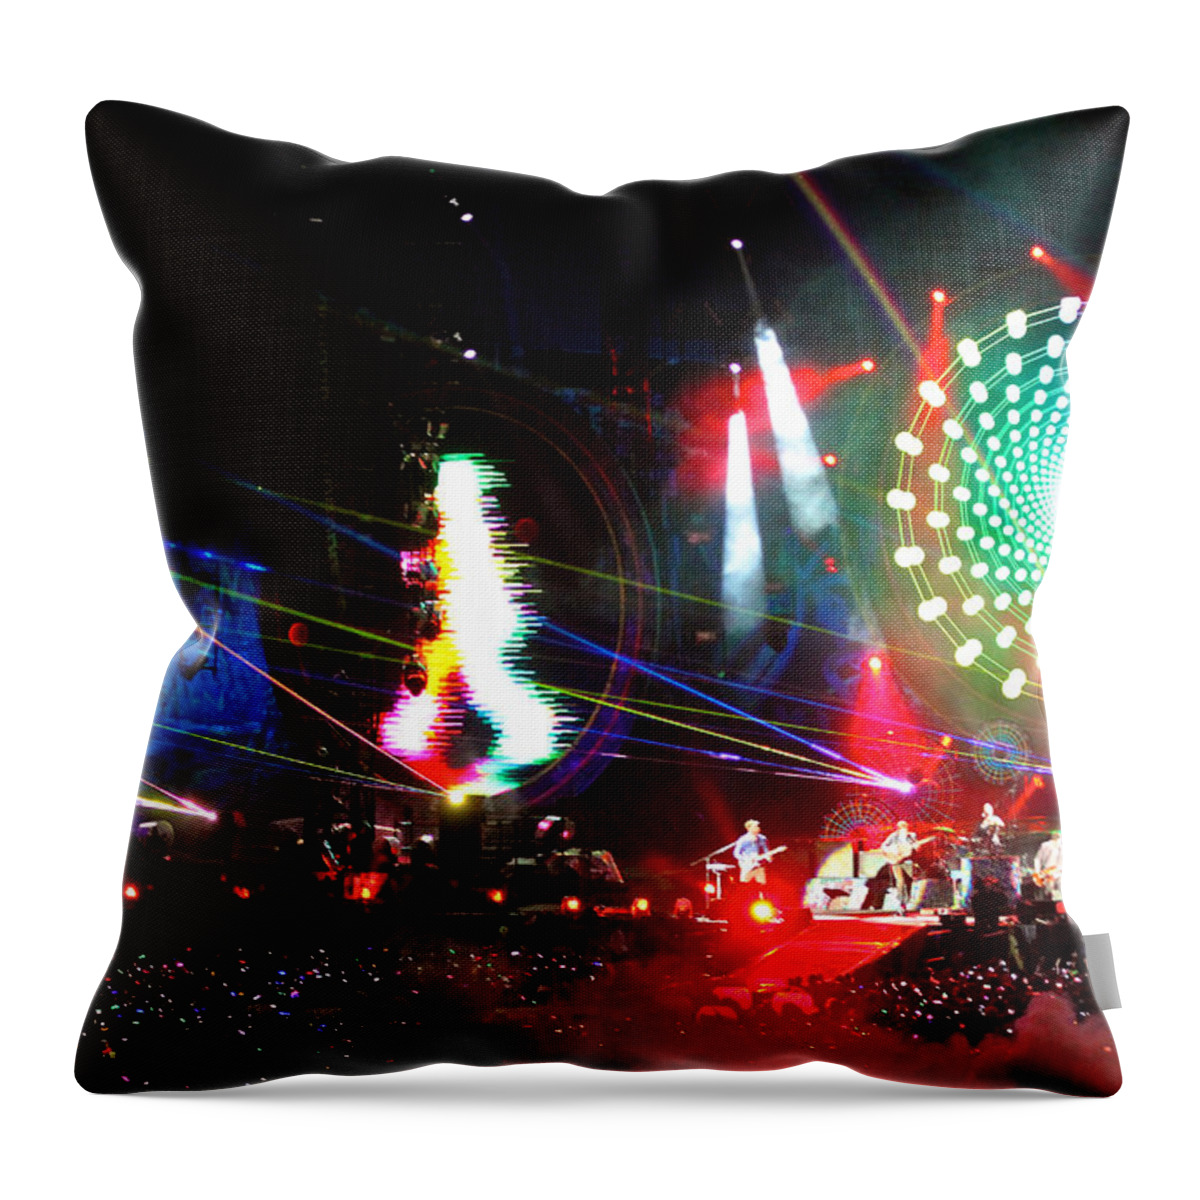 Coldplay Sydney 2012 Throw Pillow featuring the photograph Coldplay - Sydney 2012 #4 by Chris Cousins